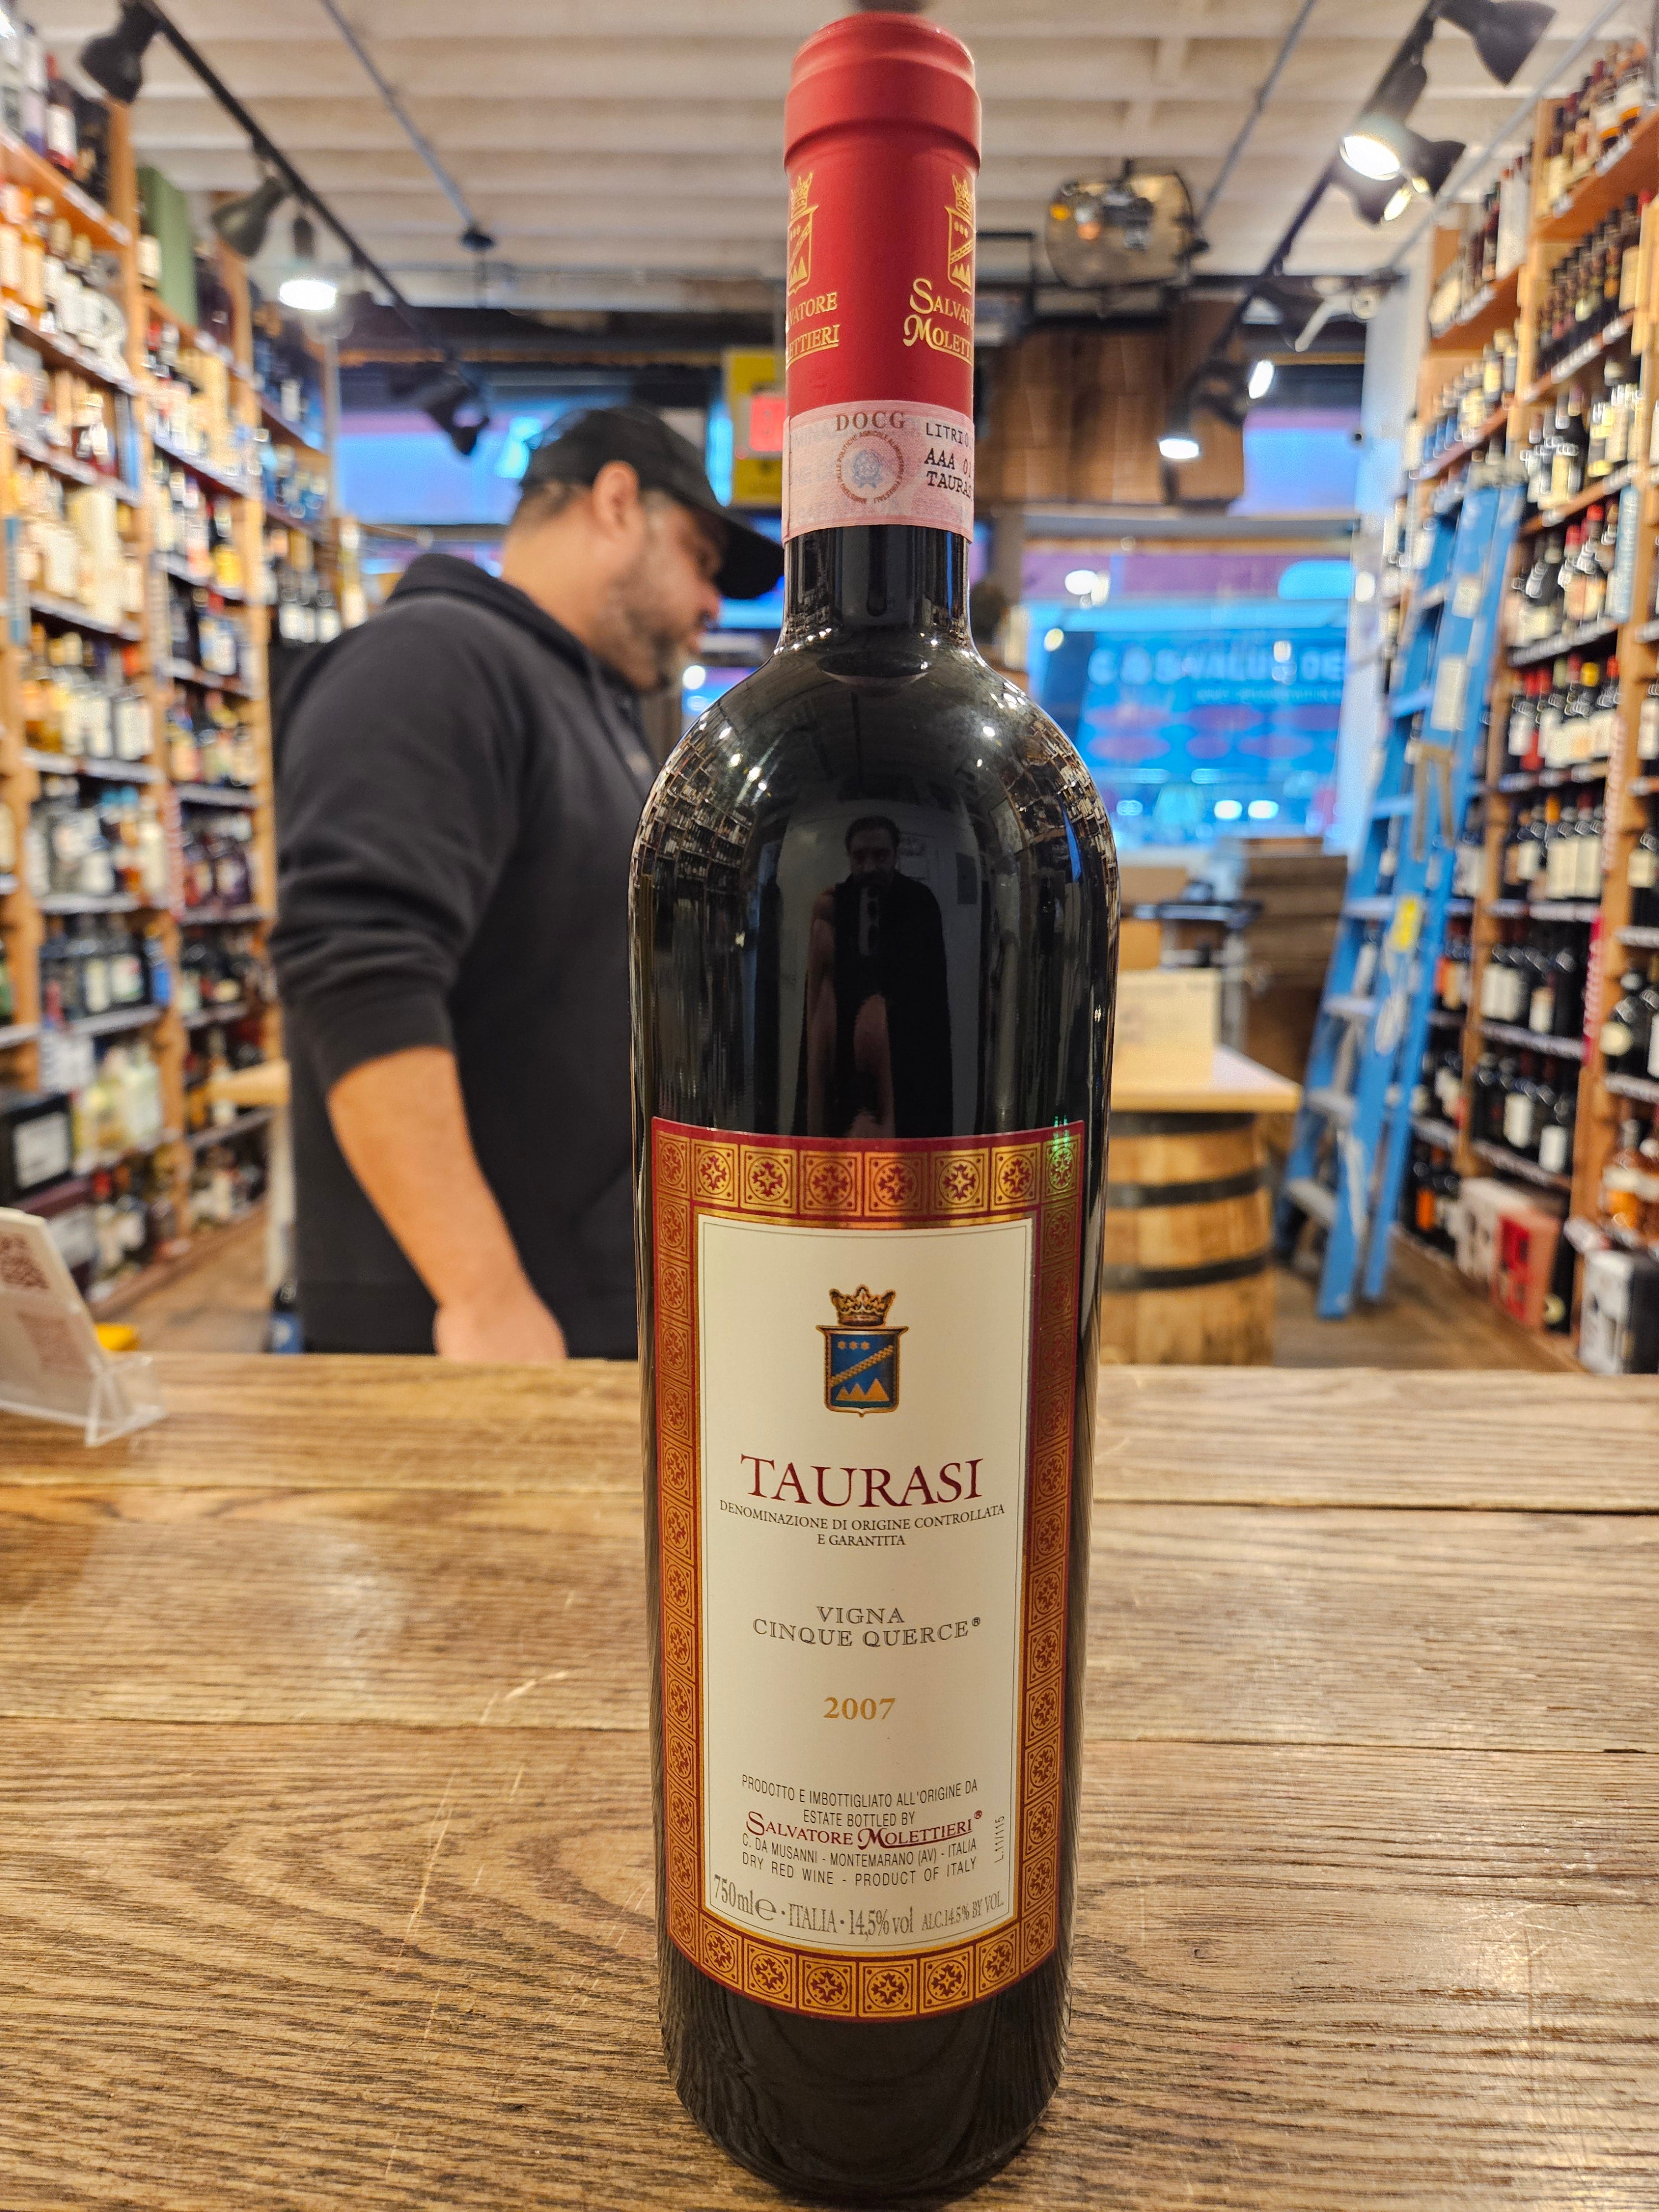 Taurasi Vigna Cinque Querce 750mL tall slim dark wine bottle with a red and white label and red top